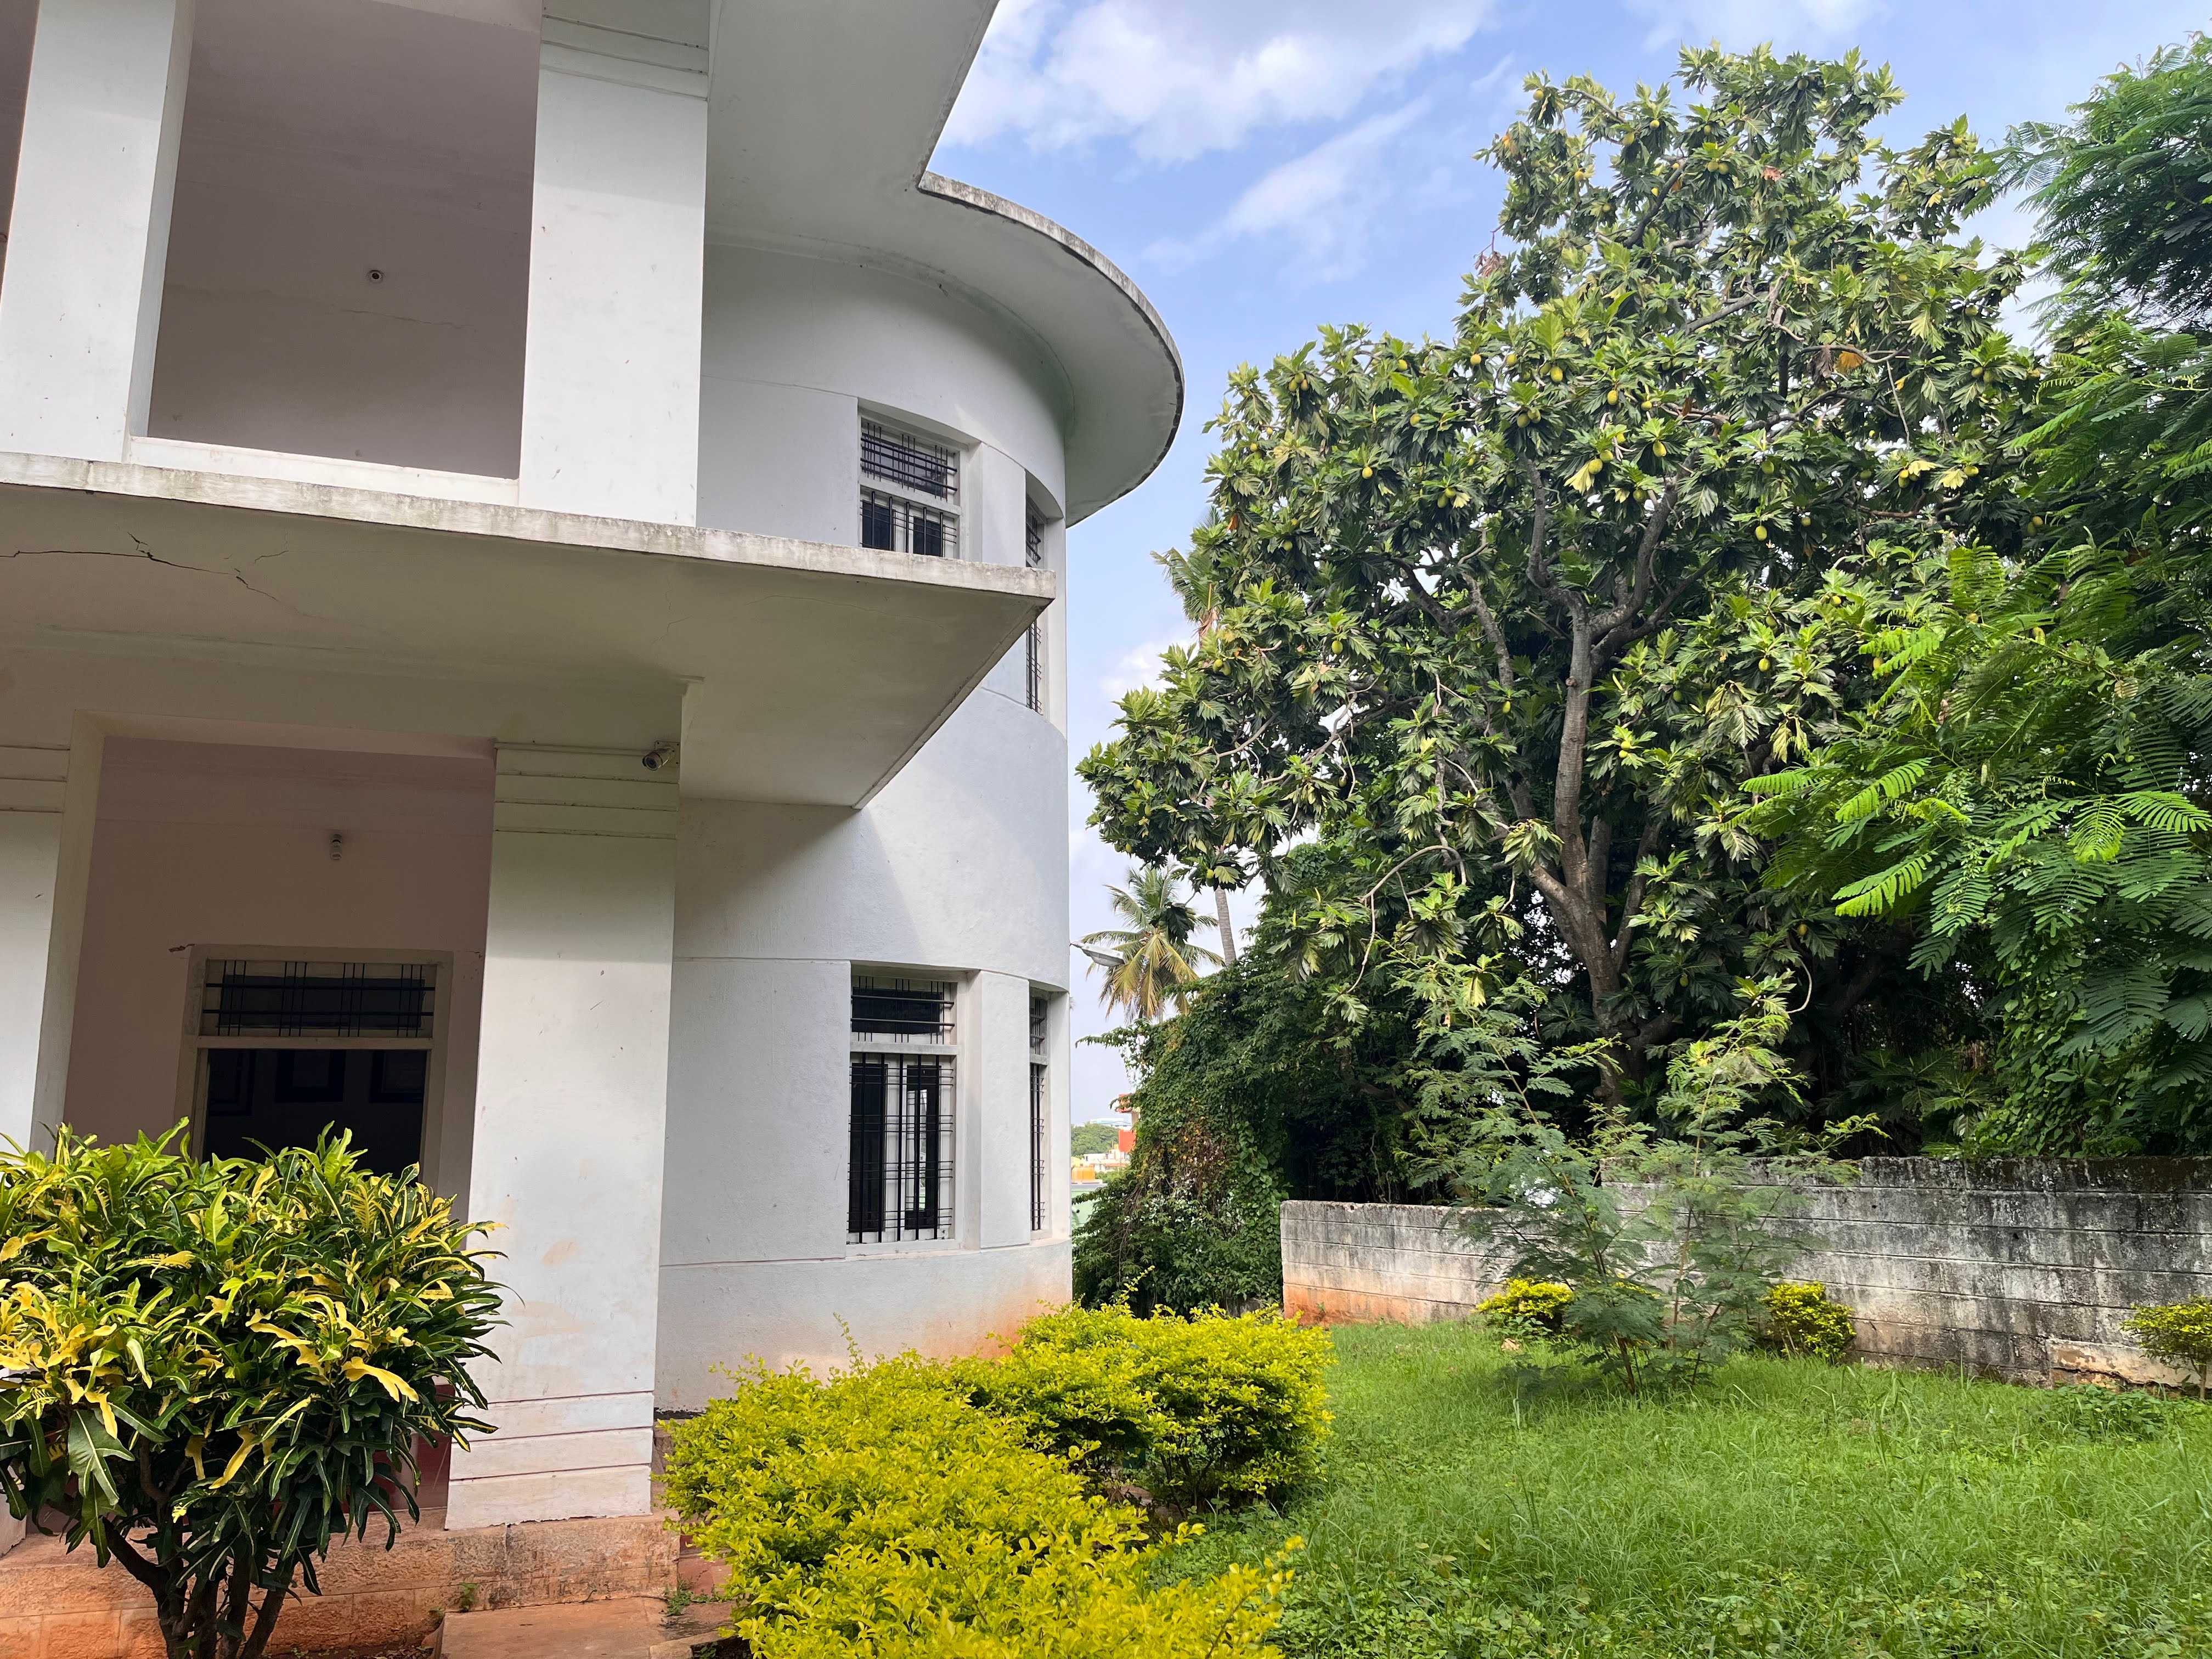 <b>In his autobiography, My Days, Narayan says that he picked out this particular spot to build a house because of the frangipani tree, which was in full bloom at the edge of the plot, writes Hema Pramaprasad in Scroll (August 2016)</b>